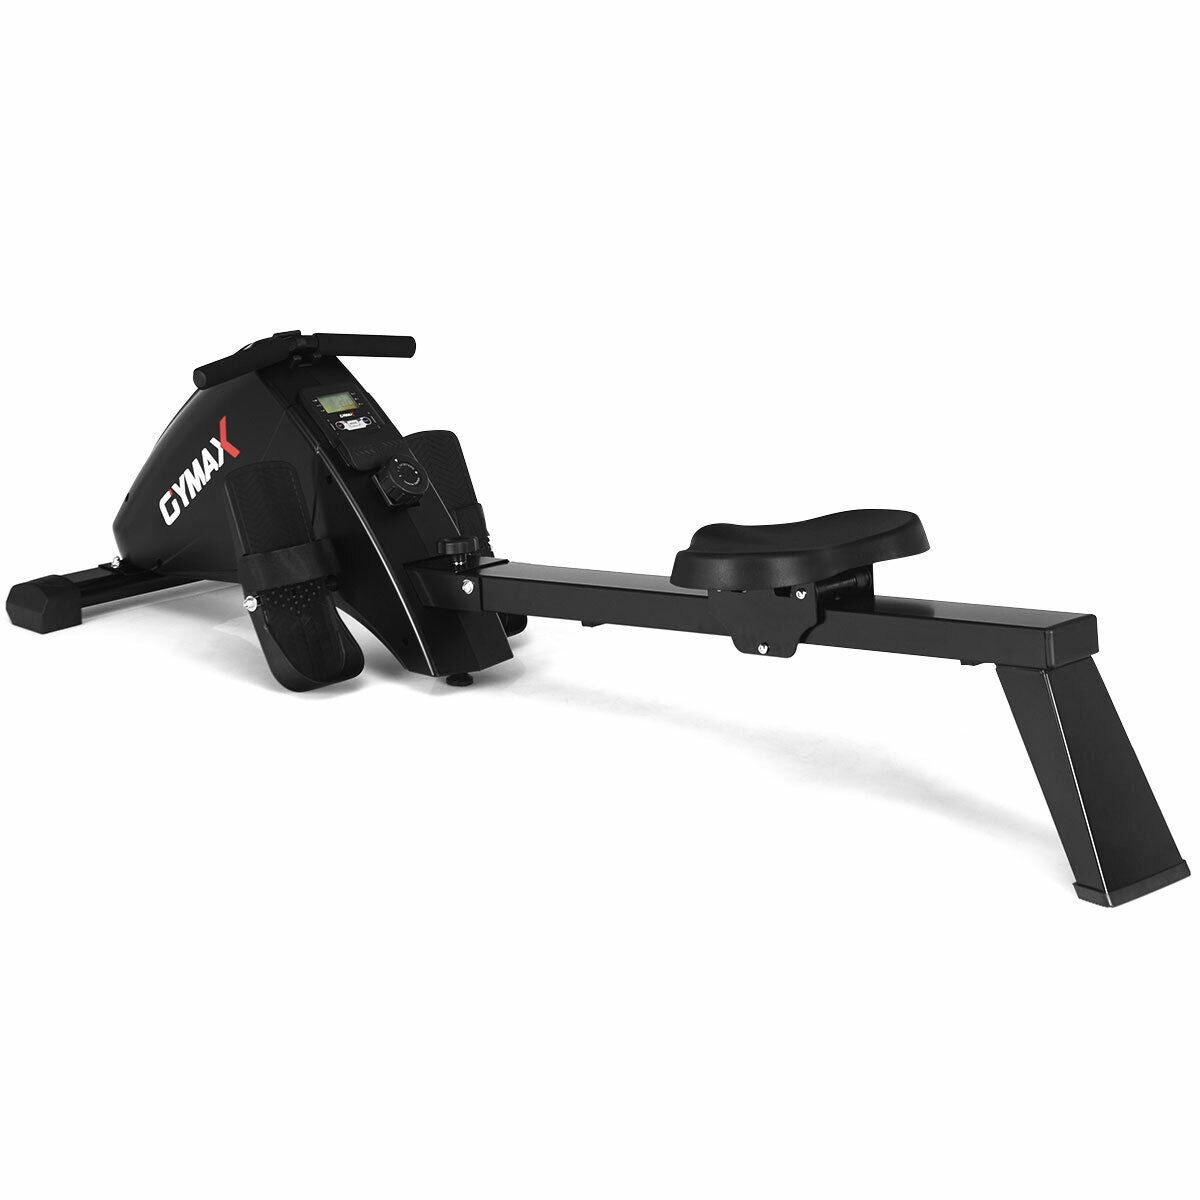 Rowing Machine Fitness Equipment - Resistance System Exercise Bike